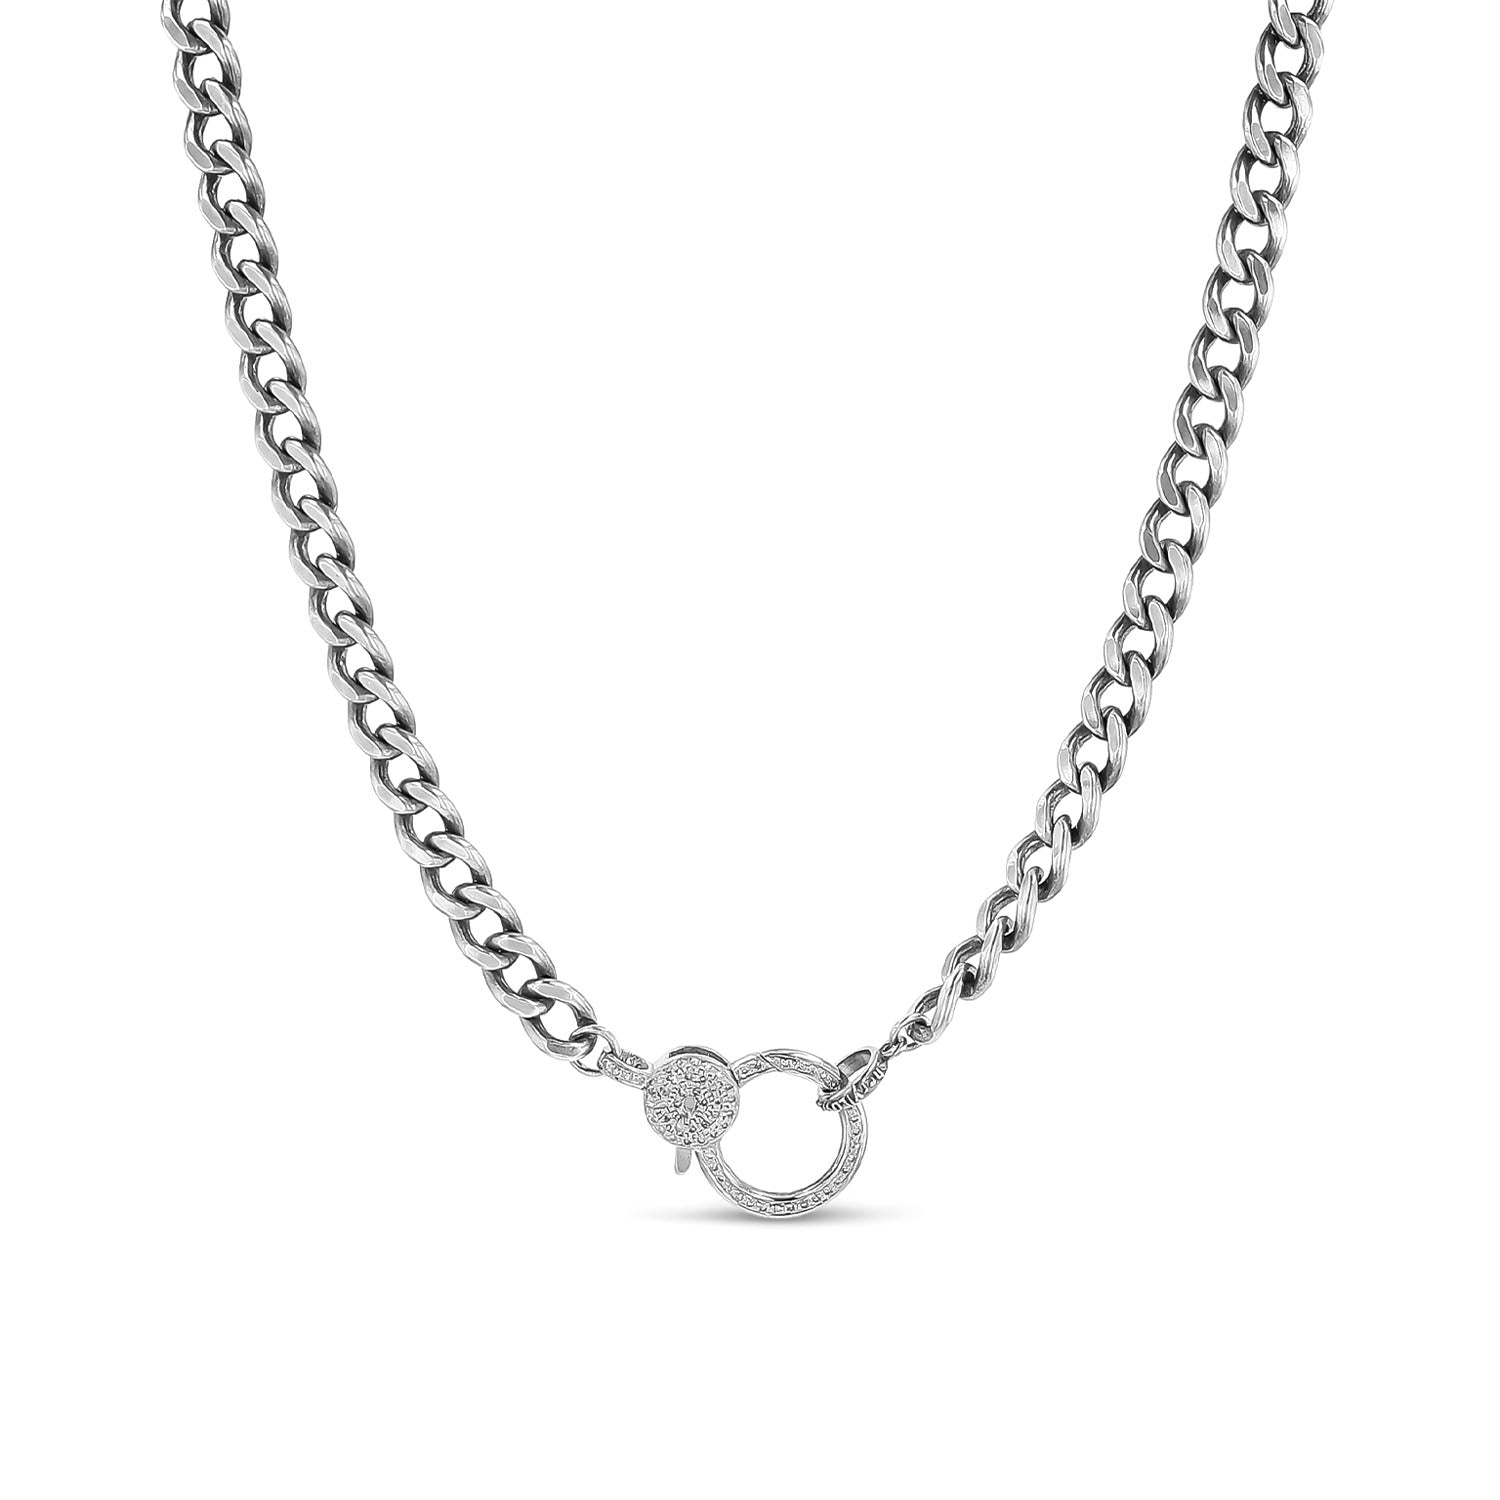 Short Heavy Cable Chain Necklace with Diamond Claw Clasp - 18" NB000064 - TBird